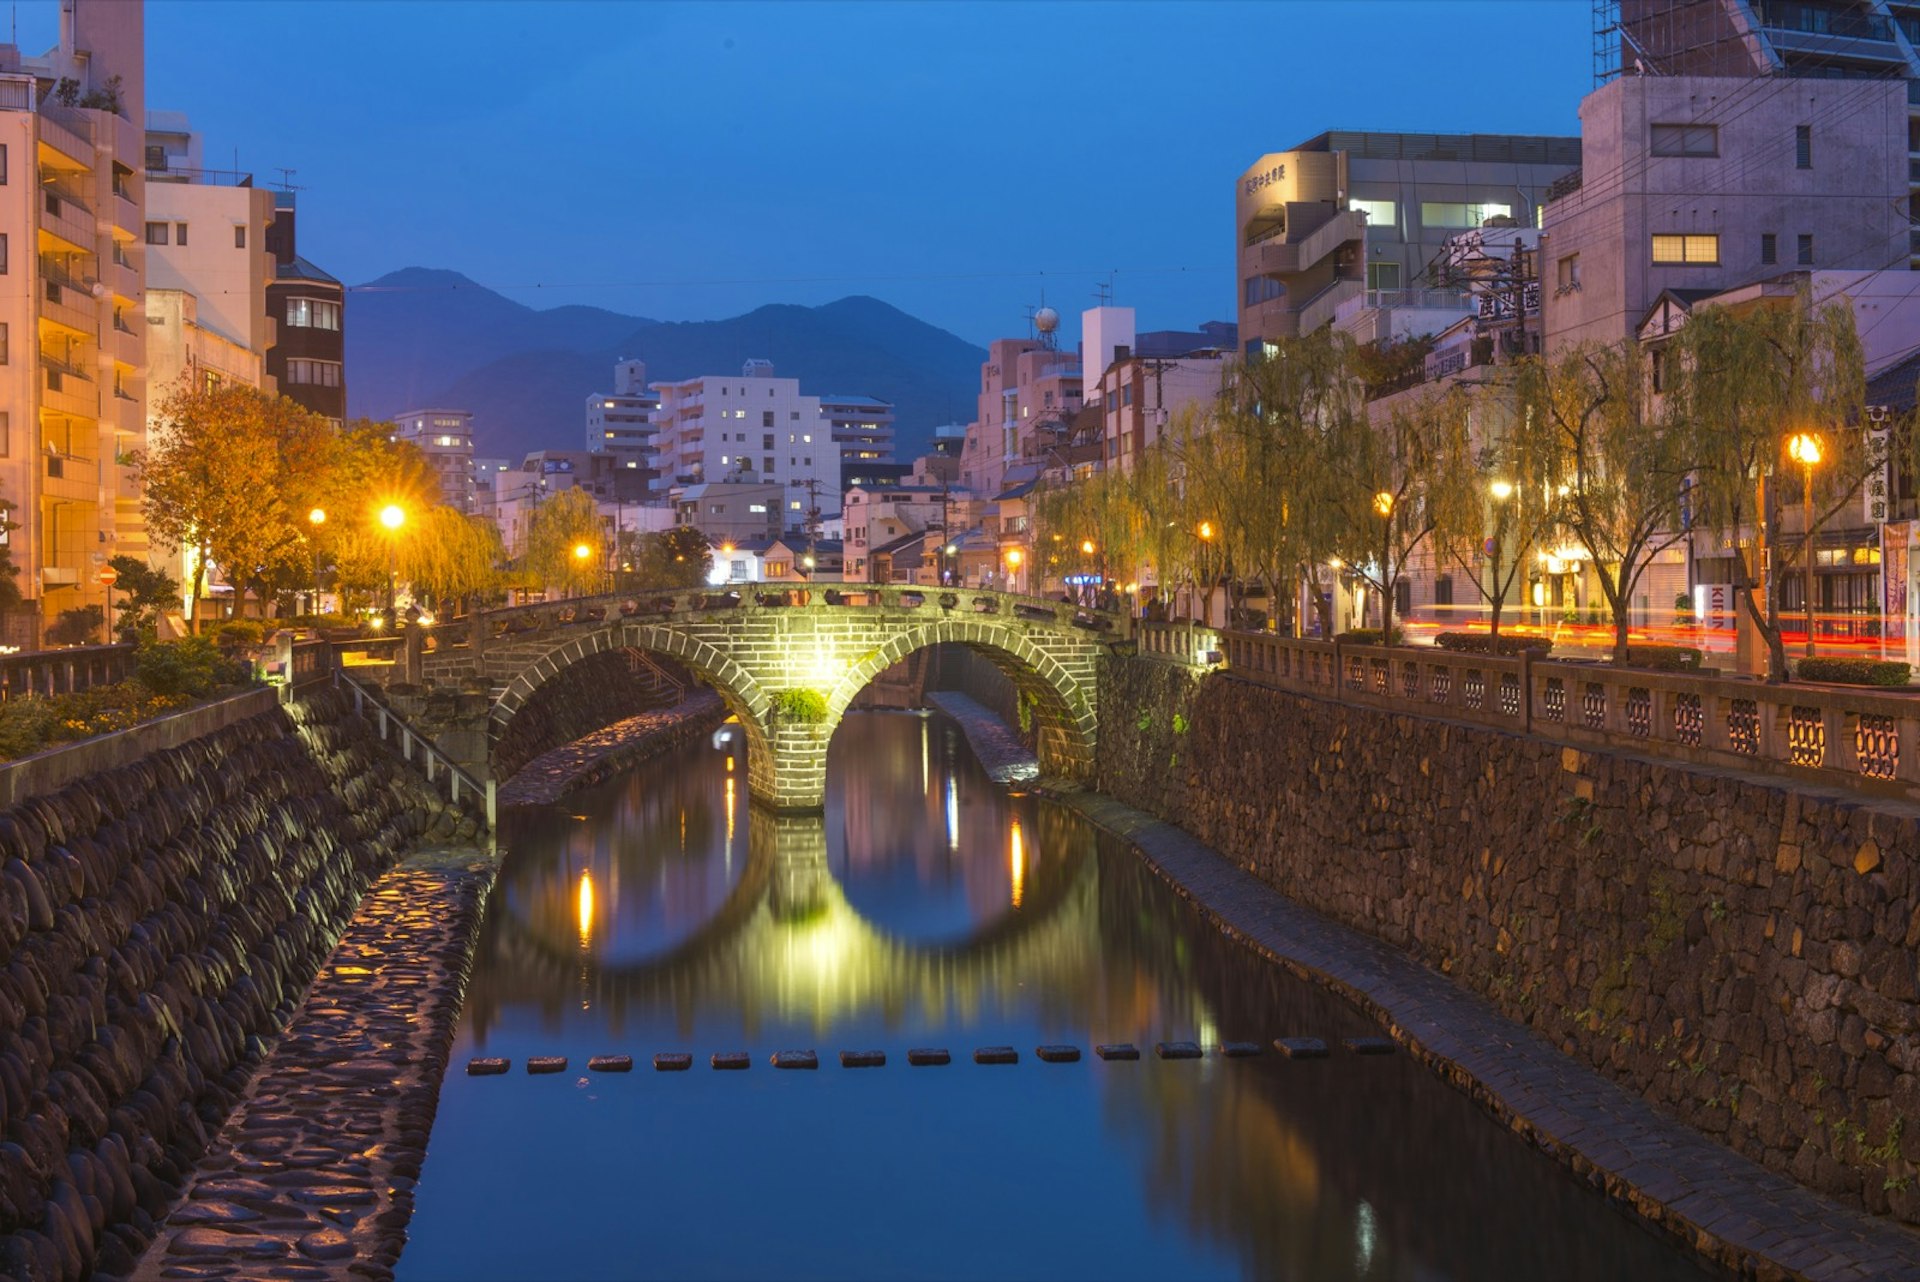 A bridge with two arches, reflected in the water, spans a steep canal in Nagasaki © Tanatat pongphibool / Getty Images